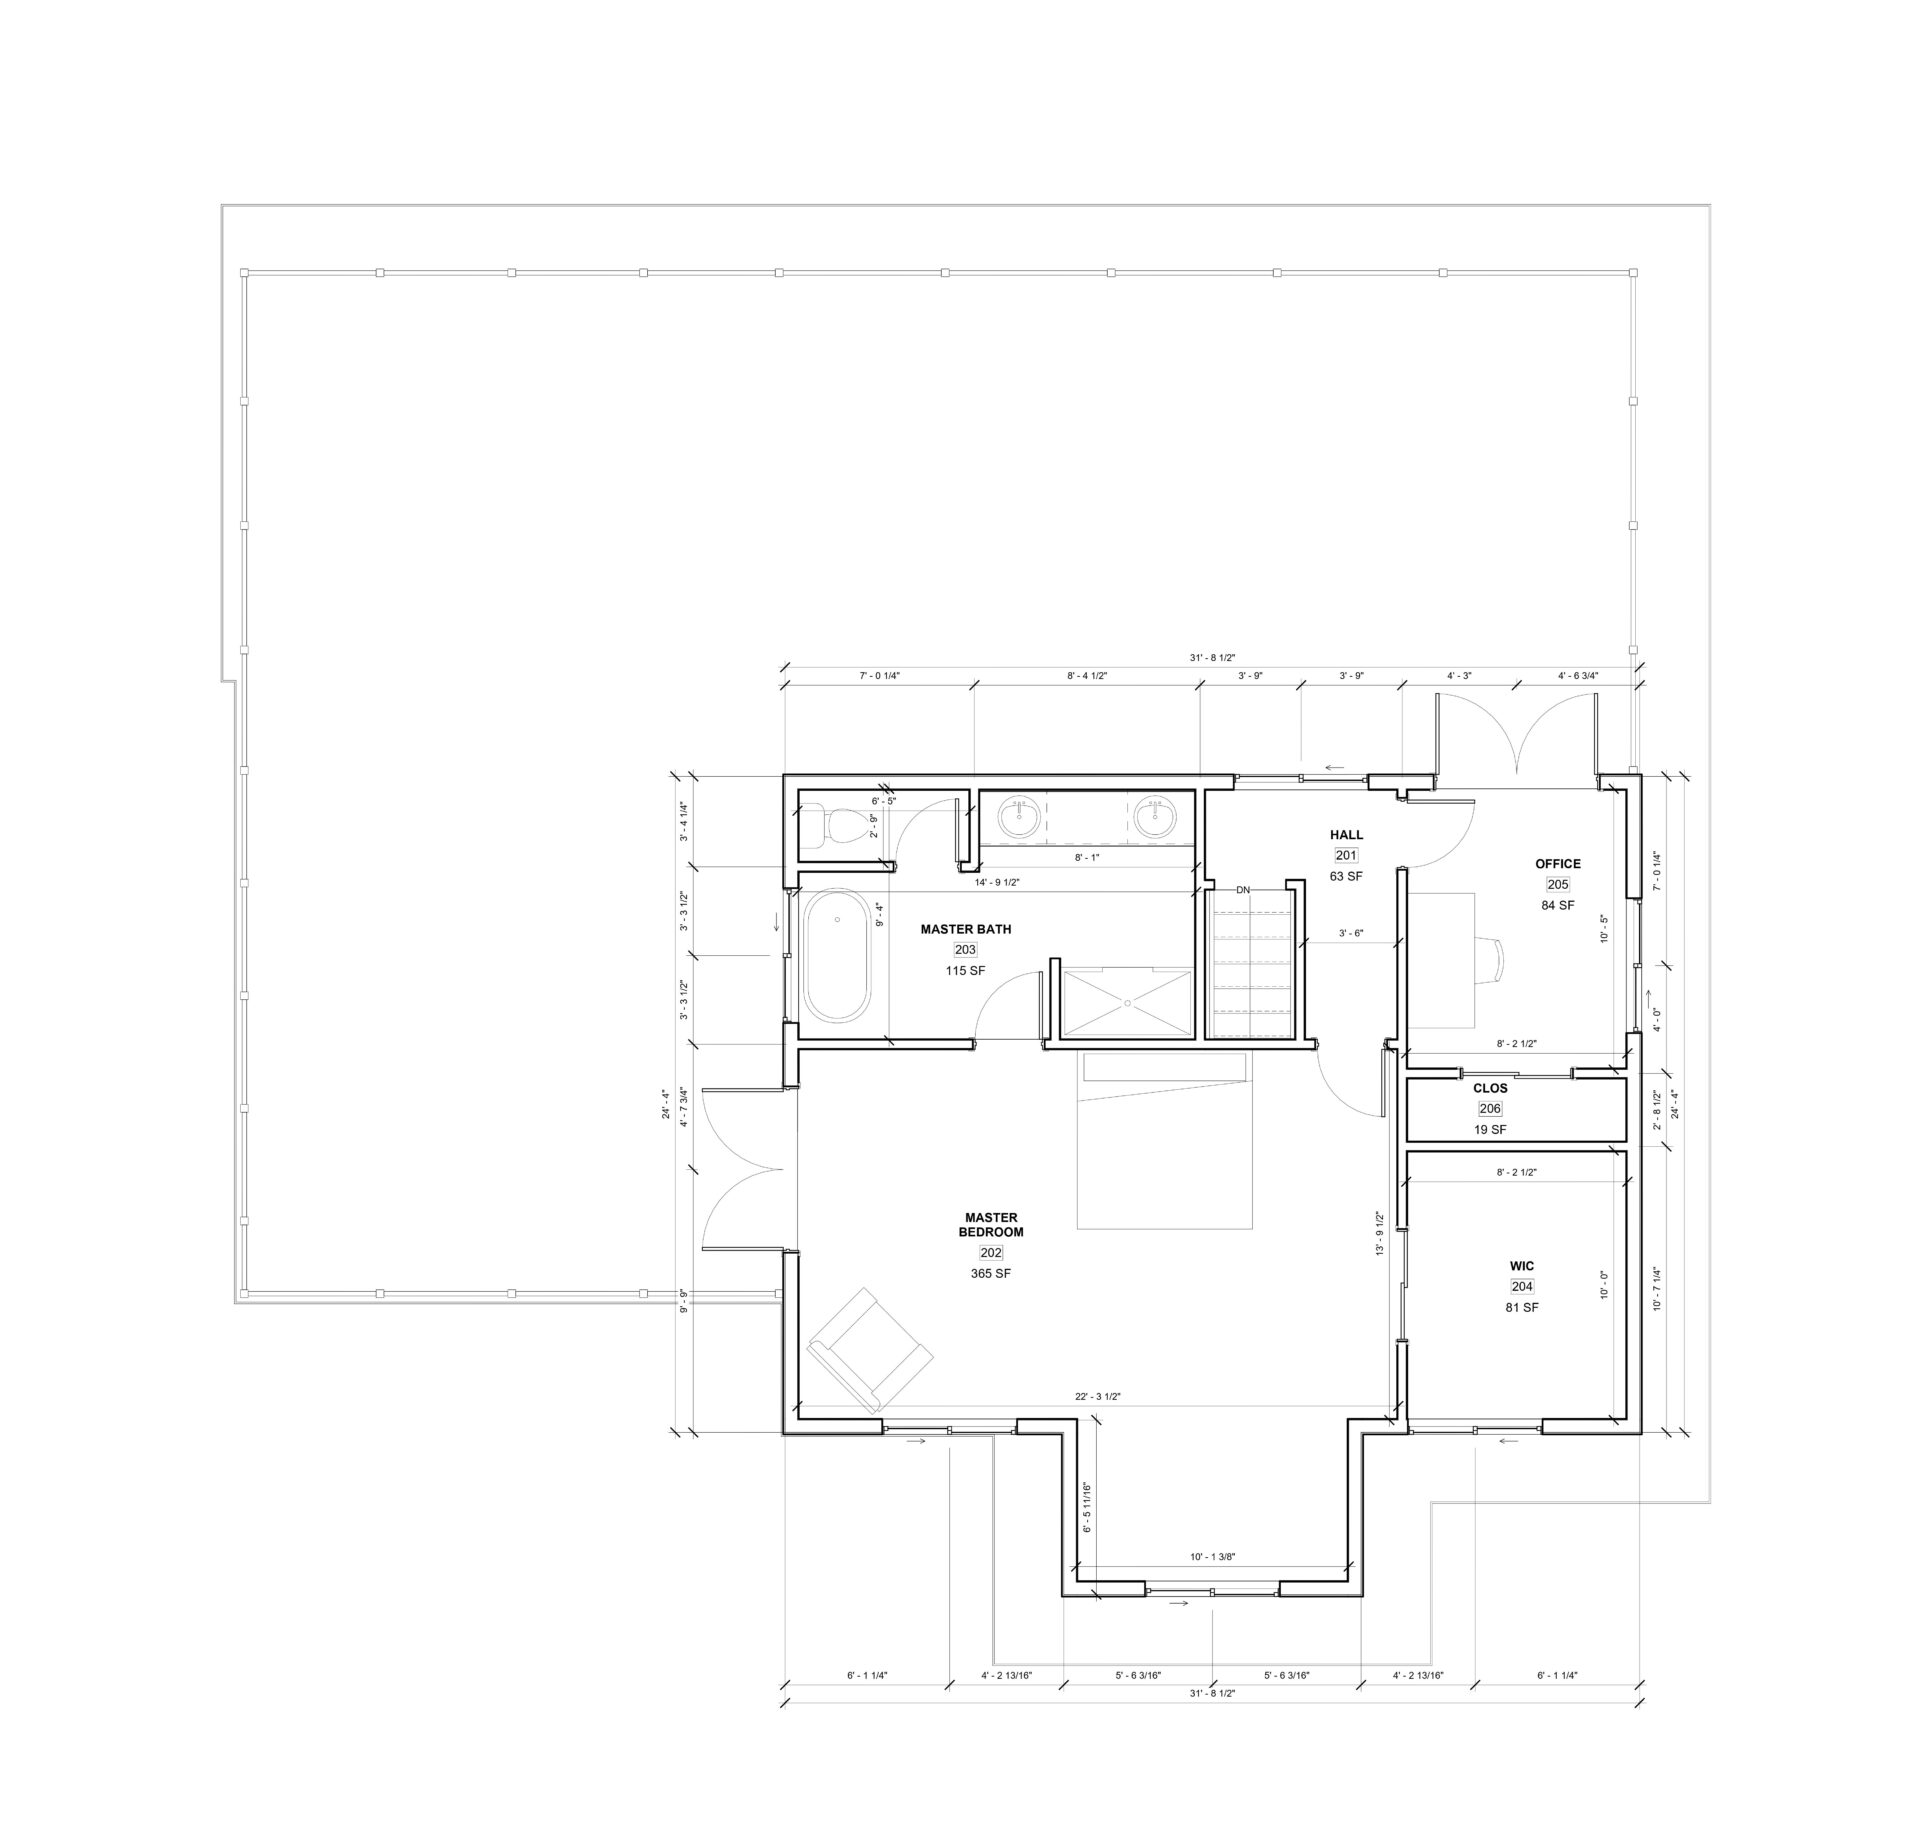 Sketched Map of NorCal House for Interior Remodeling